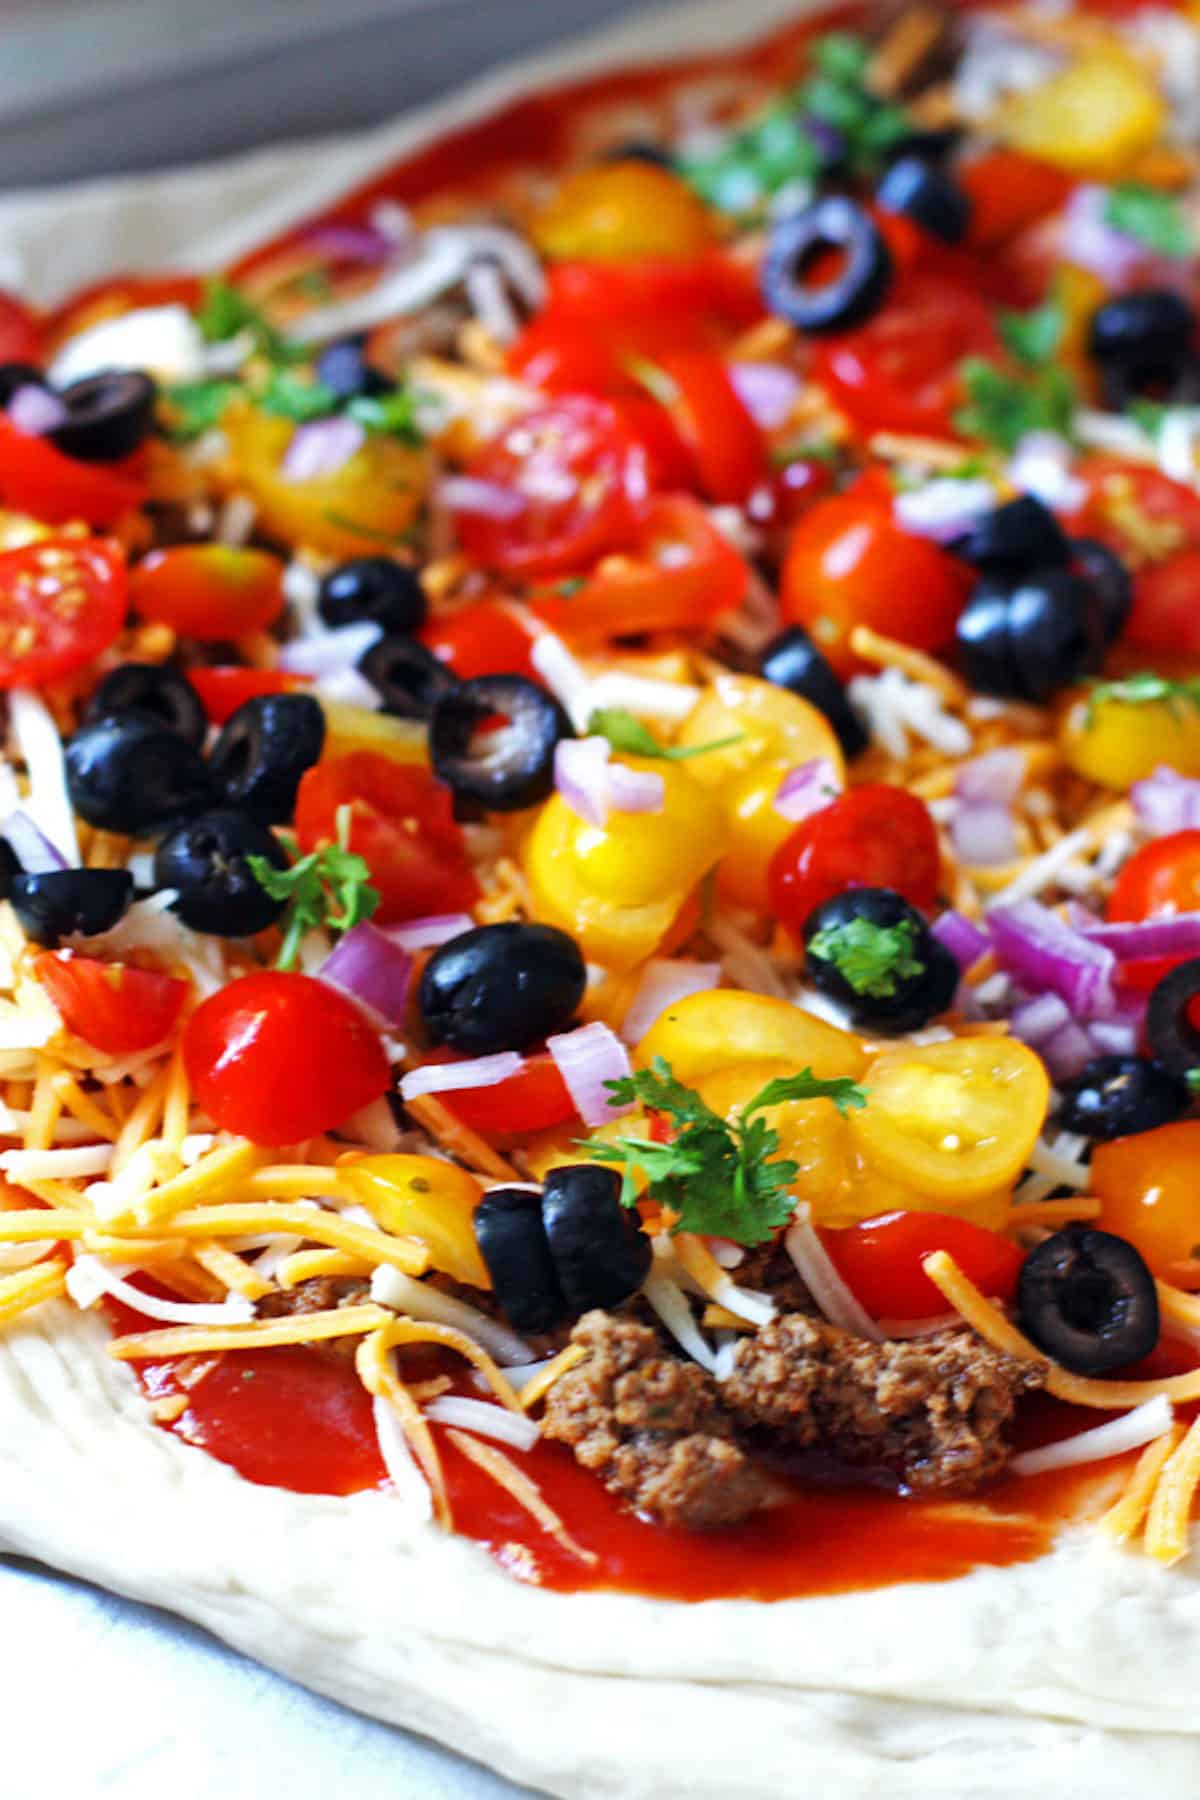 An unbaked taco pizza topped with cheese, tomatoes, ground beef, red onions, and black olives.